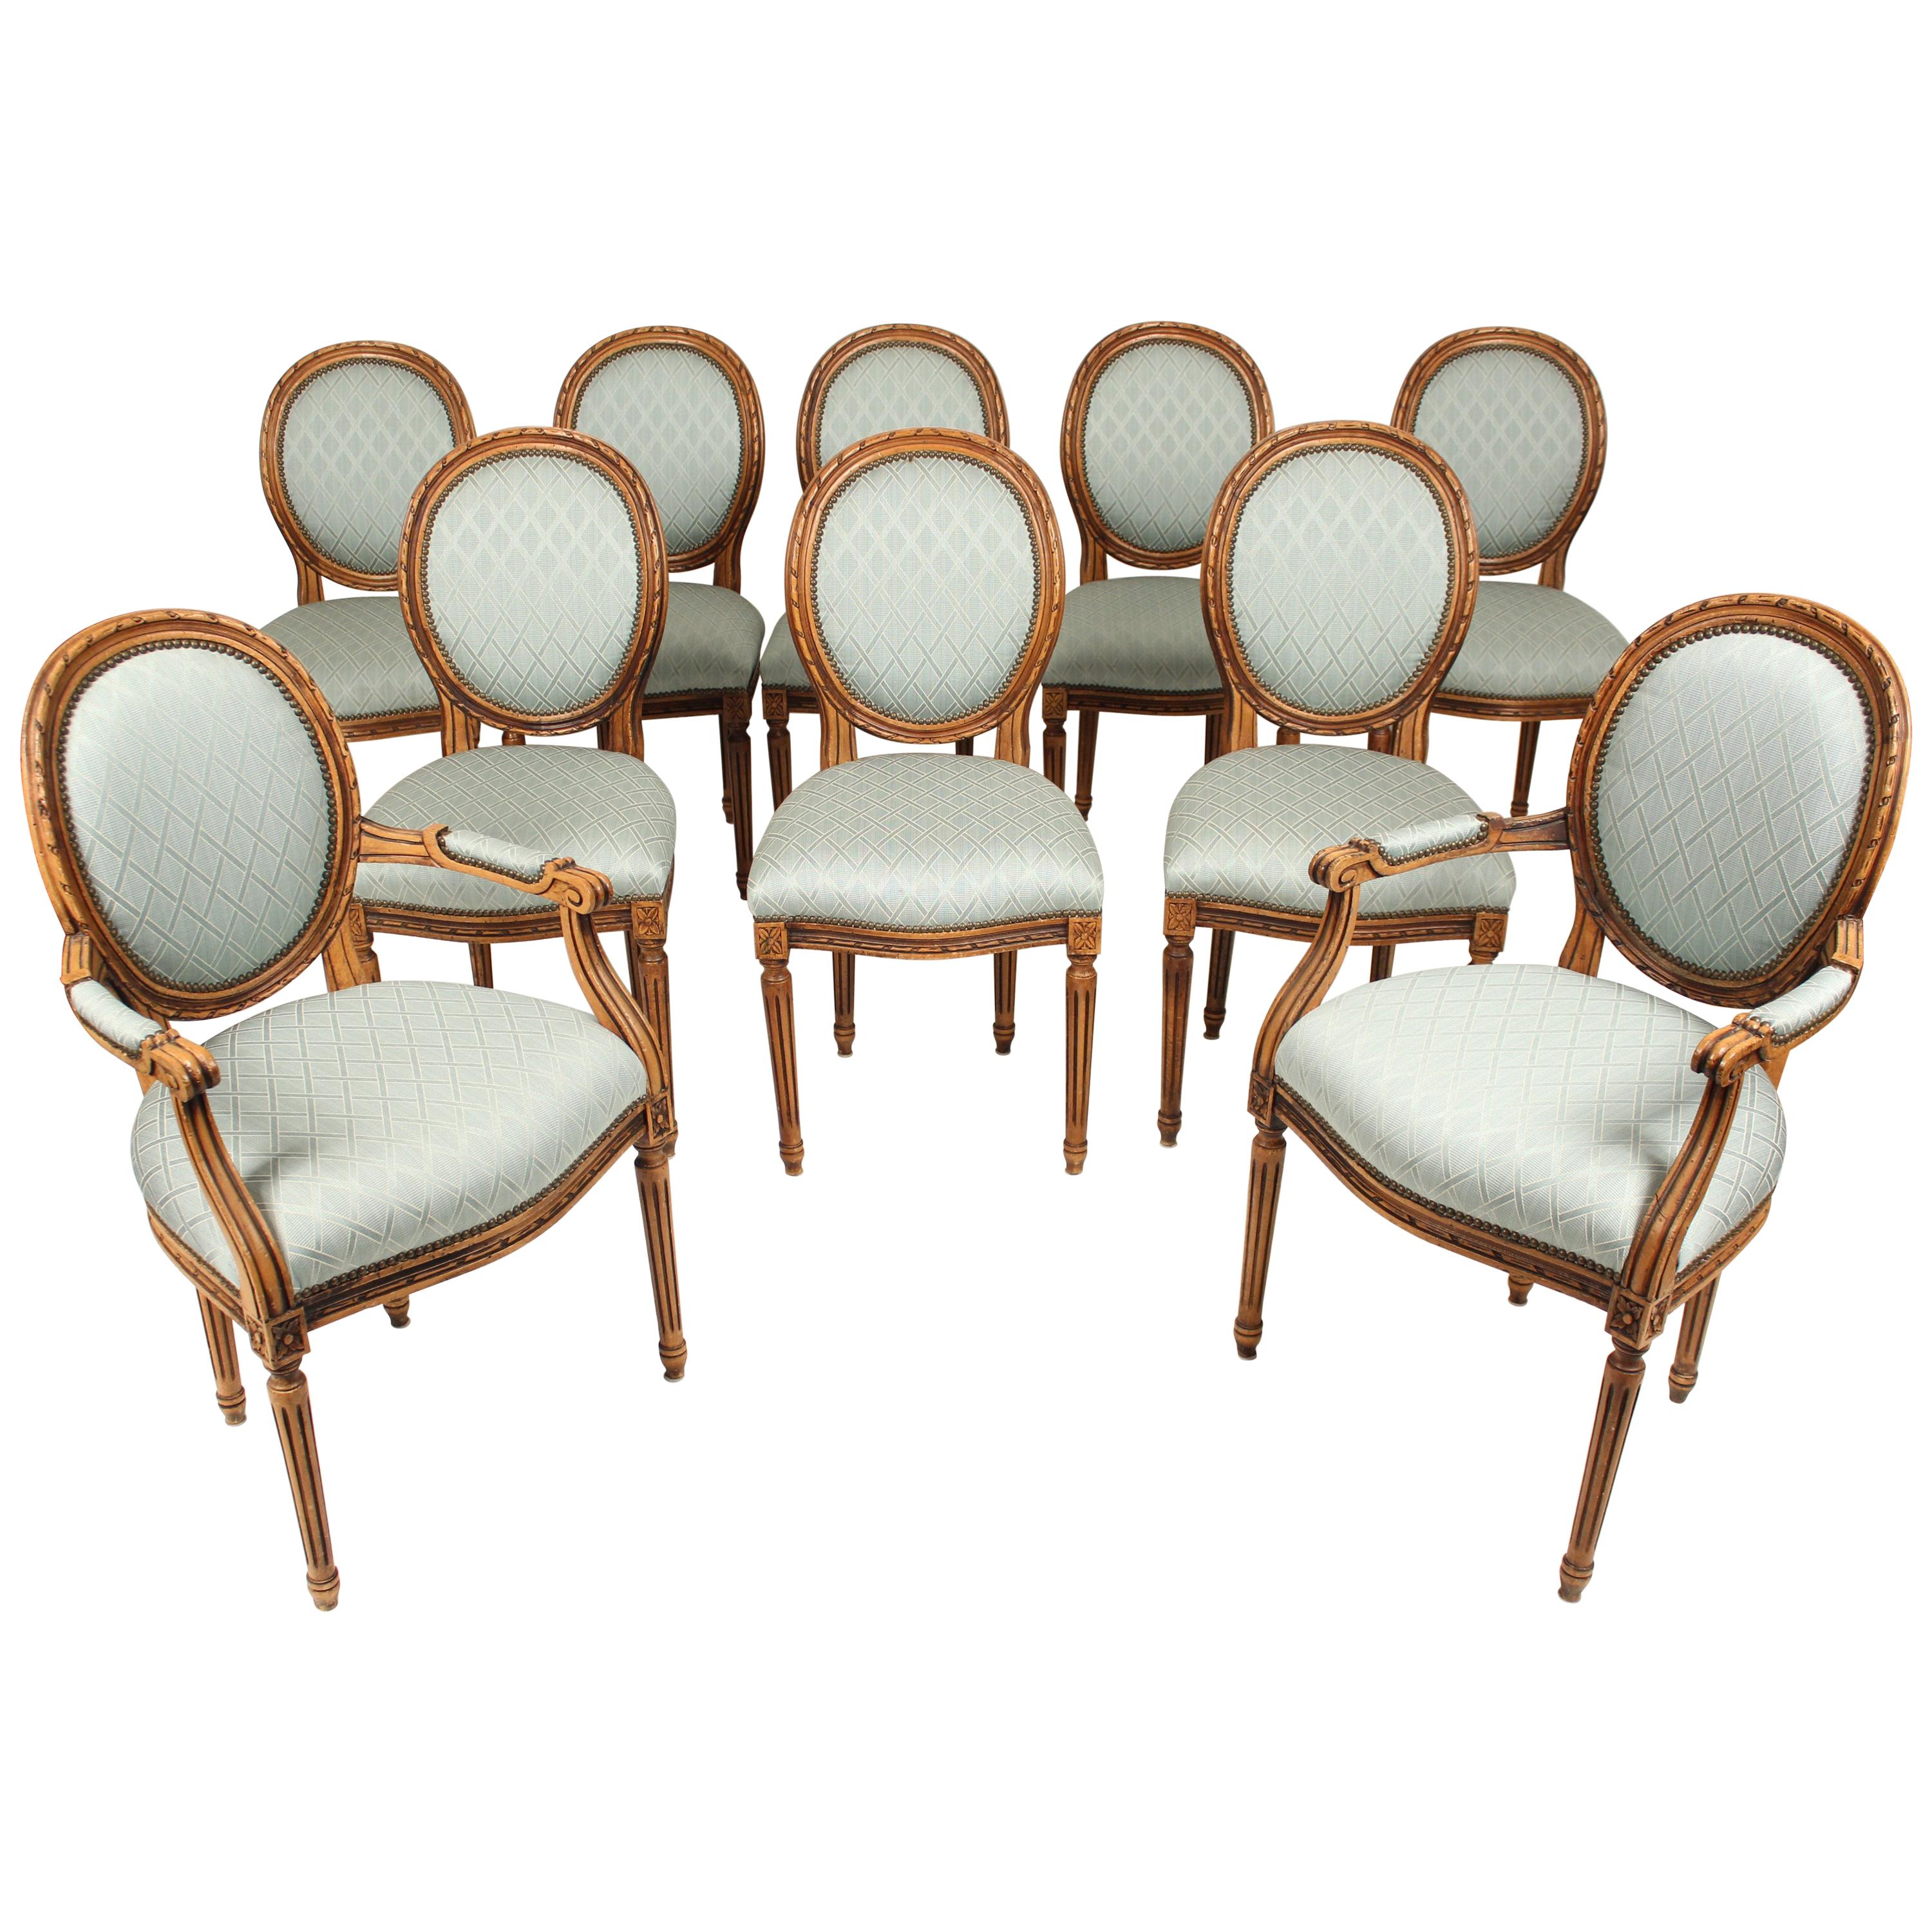 Set of 10 Louis XVI Style Dining Room Chairs